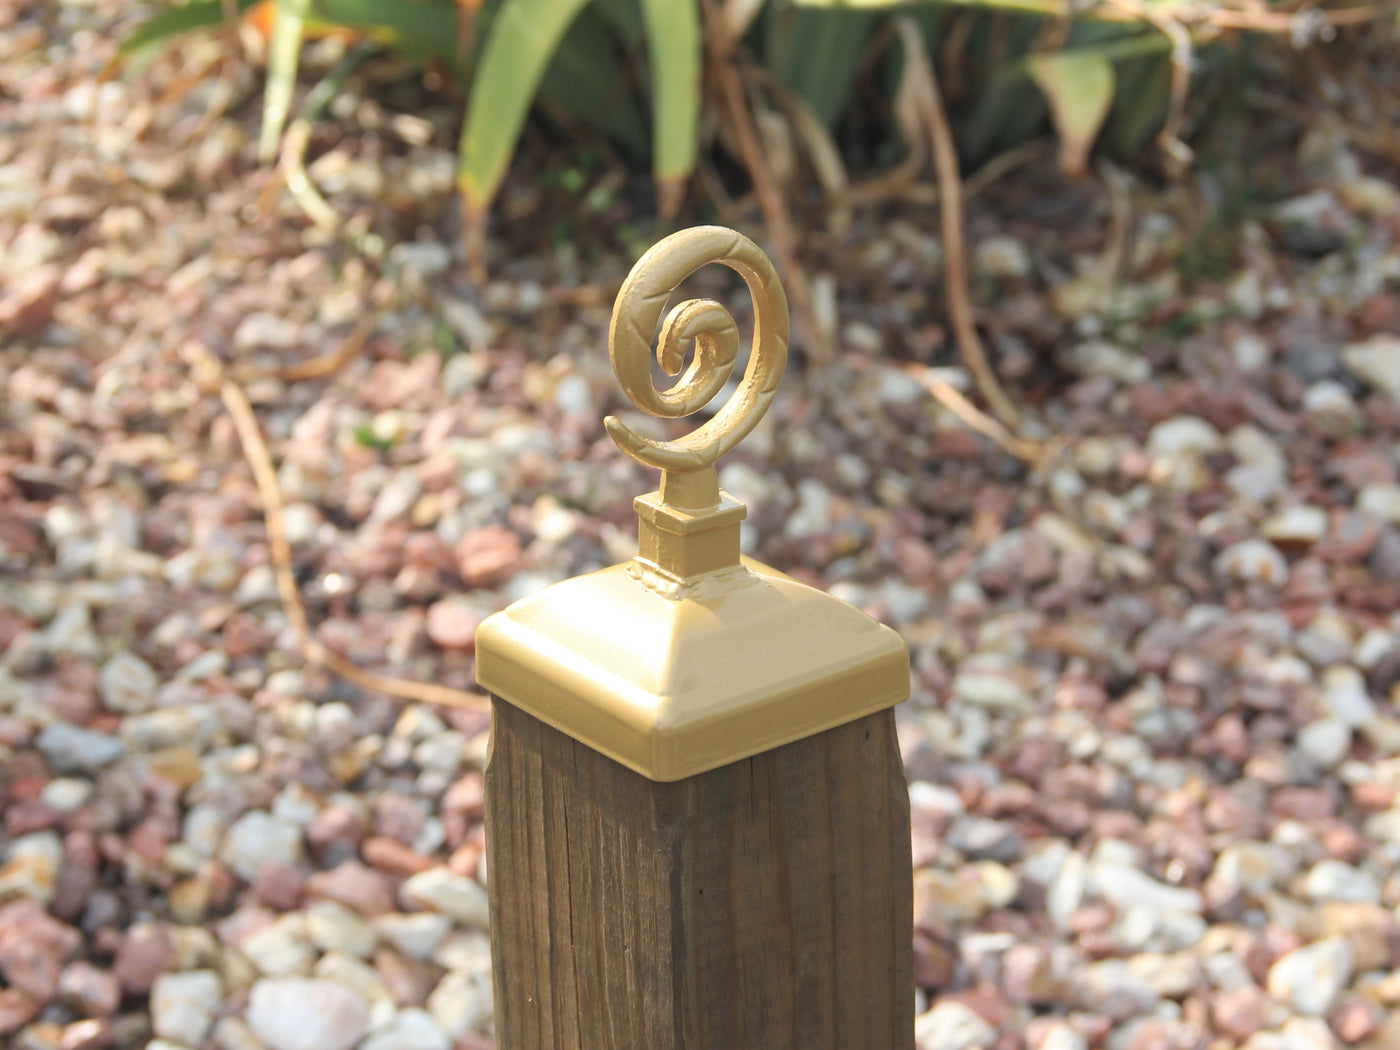 4x4 Spiral Post Cap - Madison Iron and Wood - Post Cap - metal outdoor decor - Steel deocrations - american made products - veteran owned business products - fencing decorations - fencing supplies - custom wall decorations - personalized wall signs - steel - decorative post caps - steel post caps - metal post caps - brackets - structural brackets - home improvement - easter - easter decorations - easter gift - easter yard decor